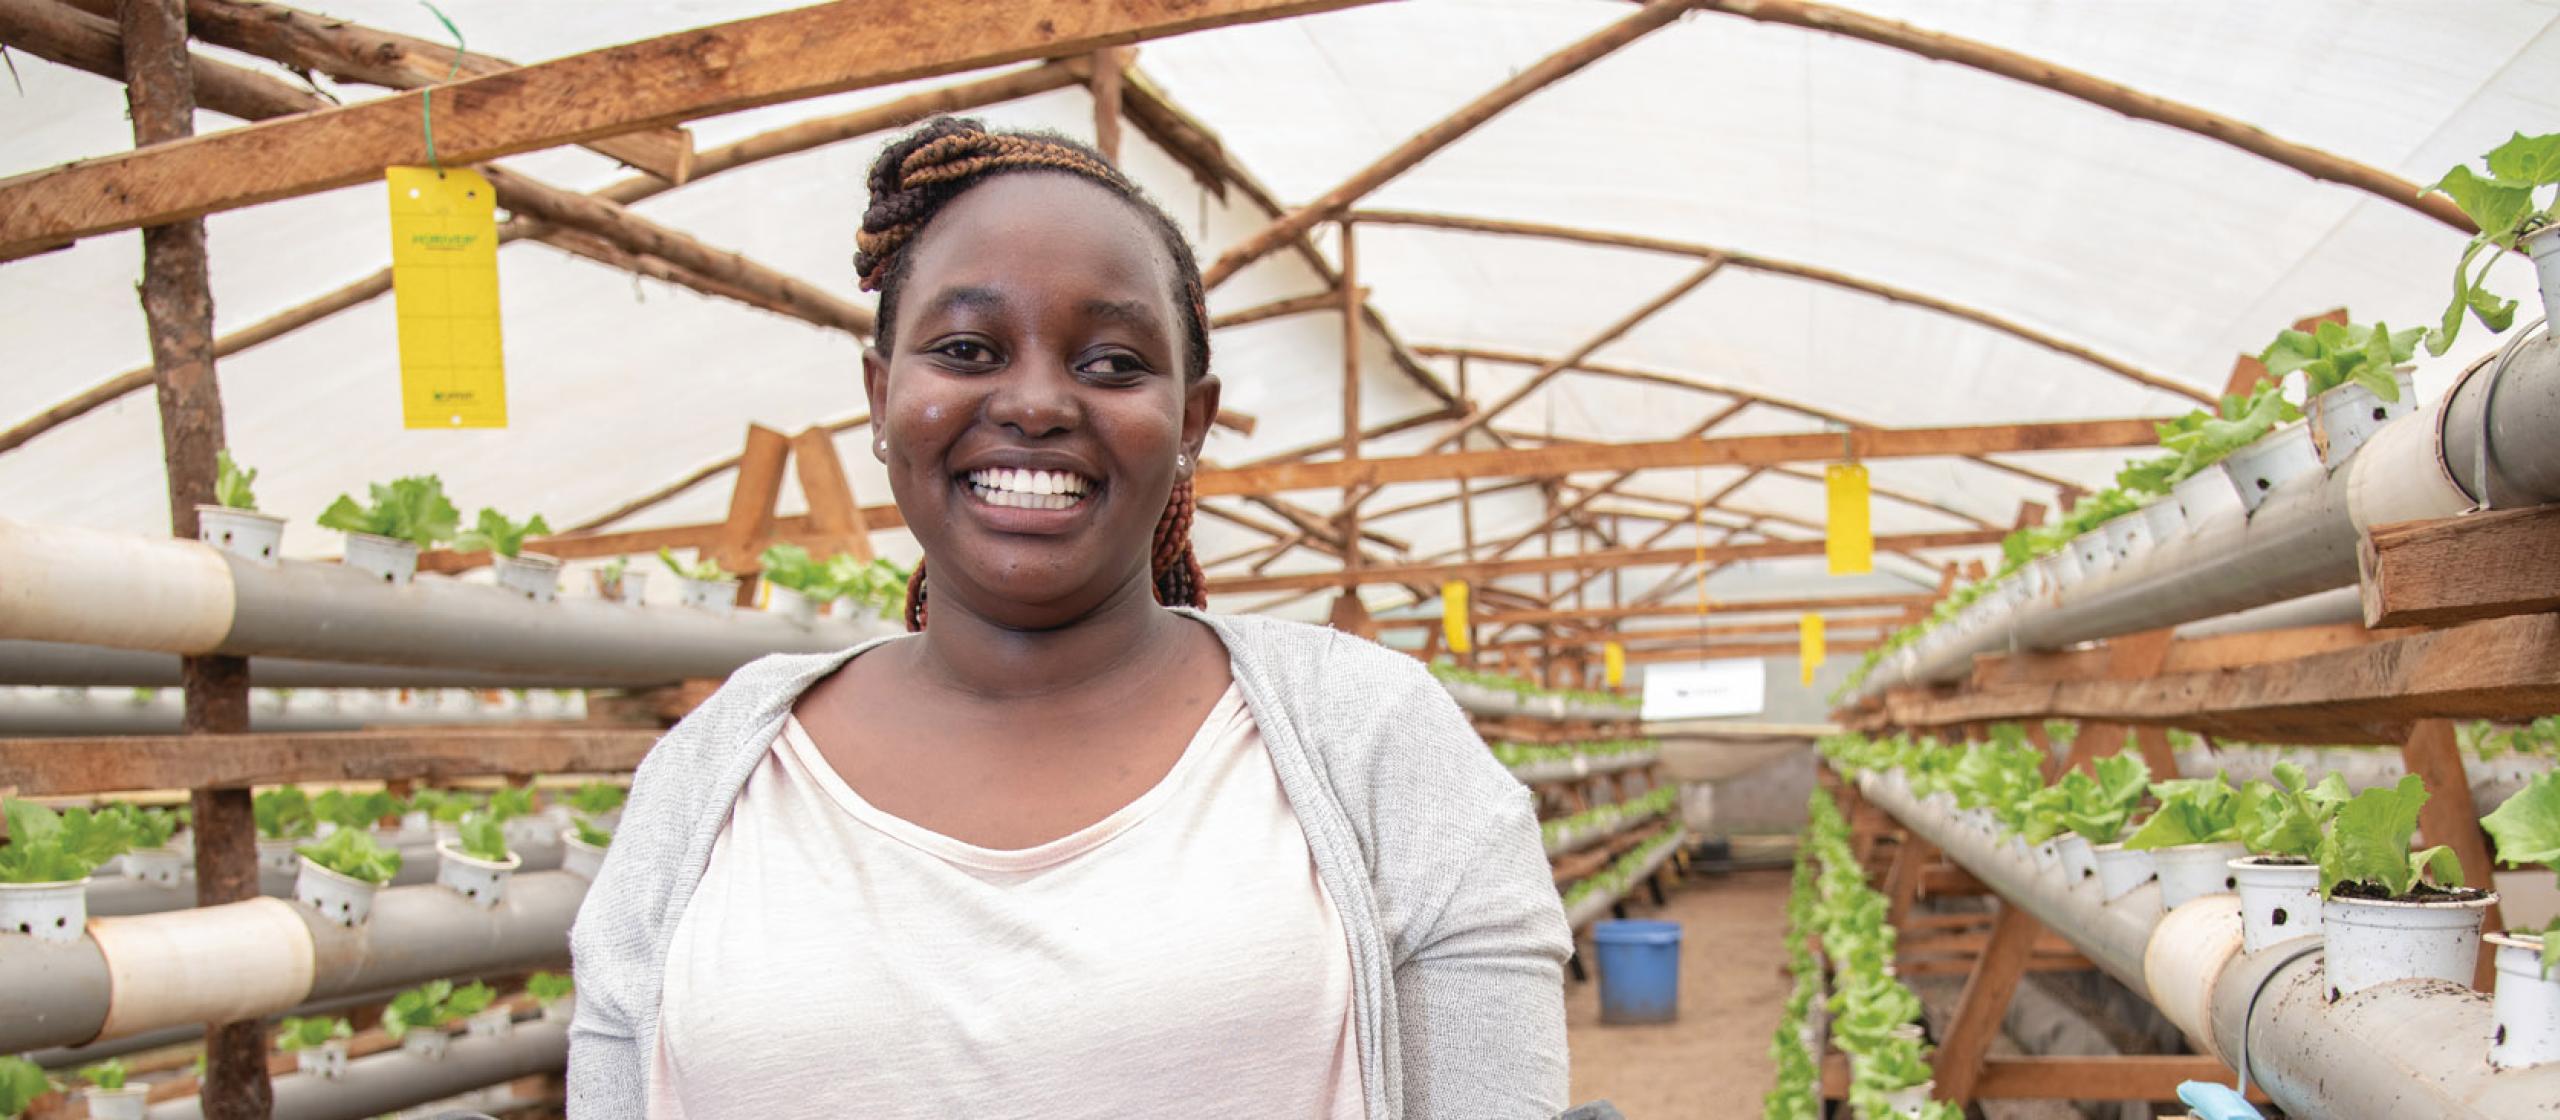 A smiling woman standing in greenhouse